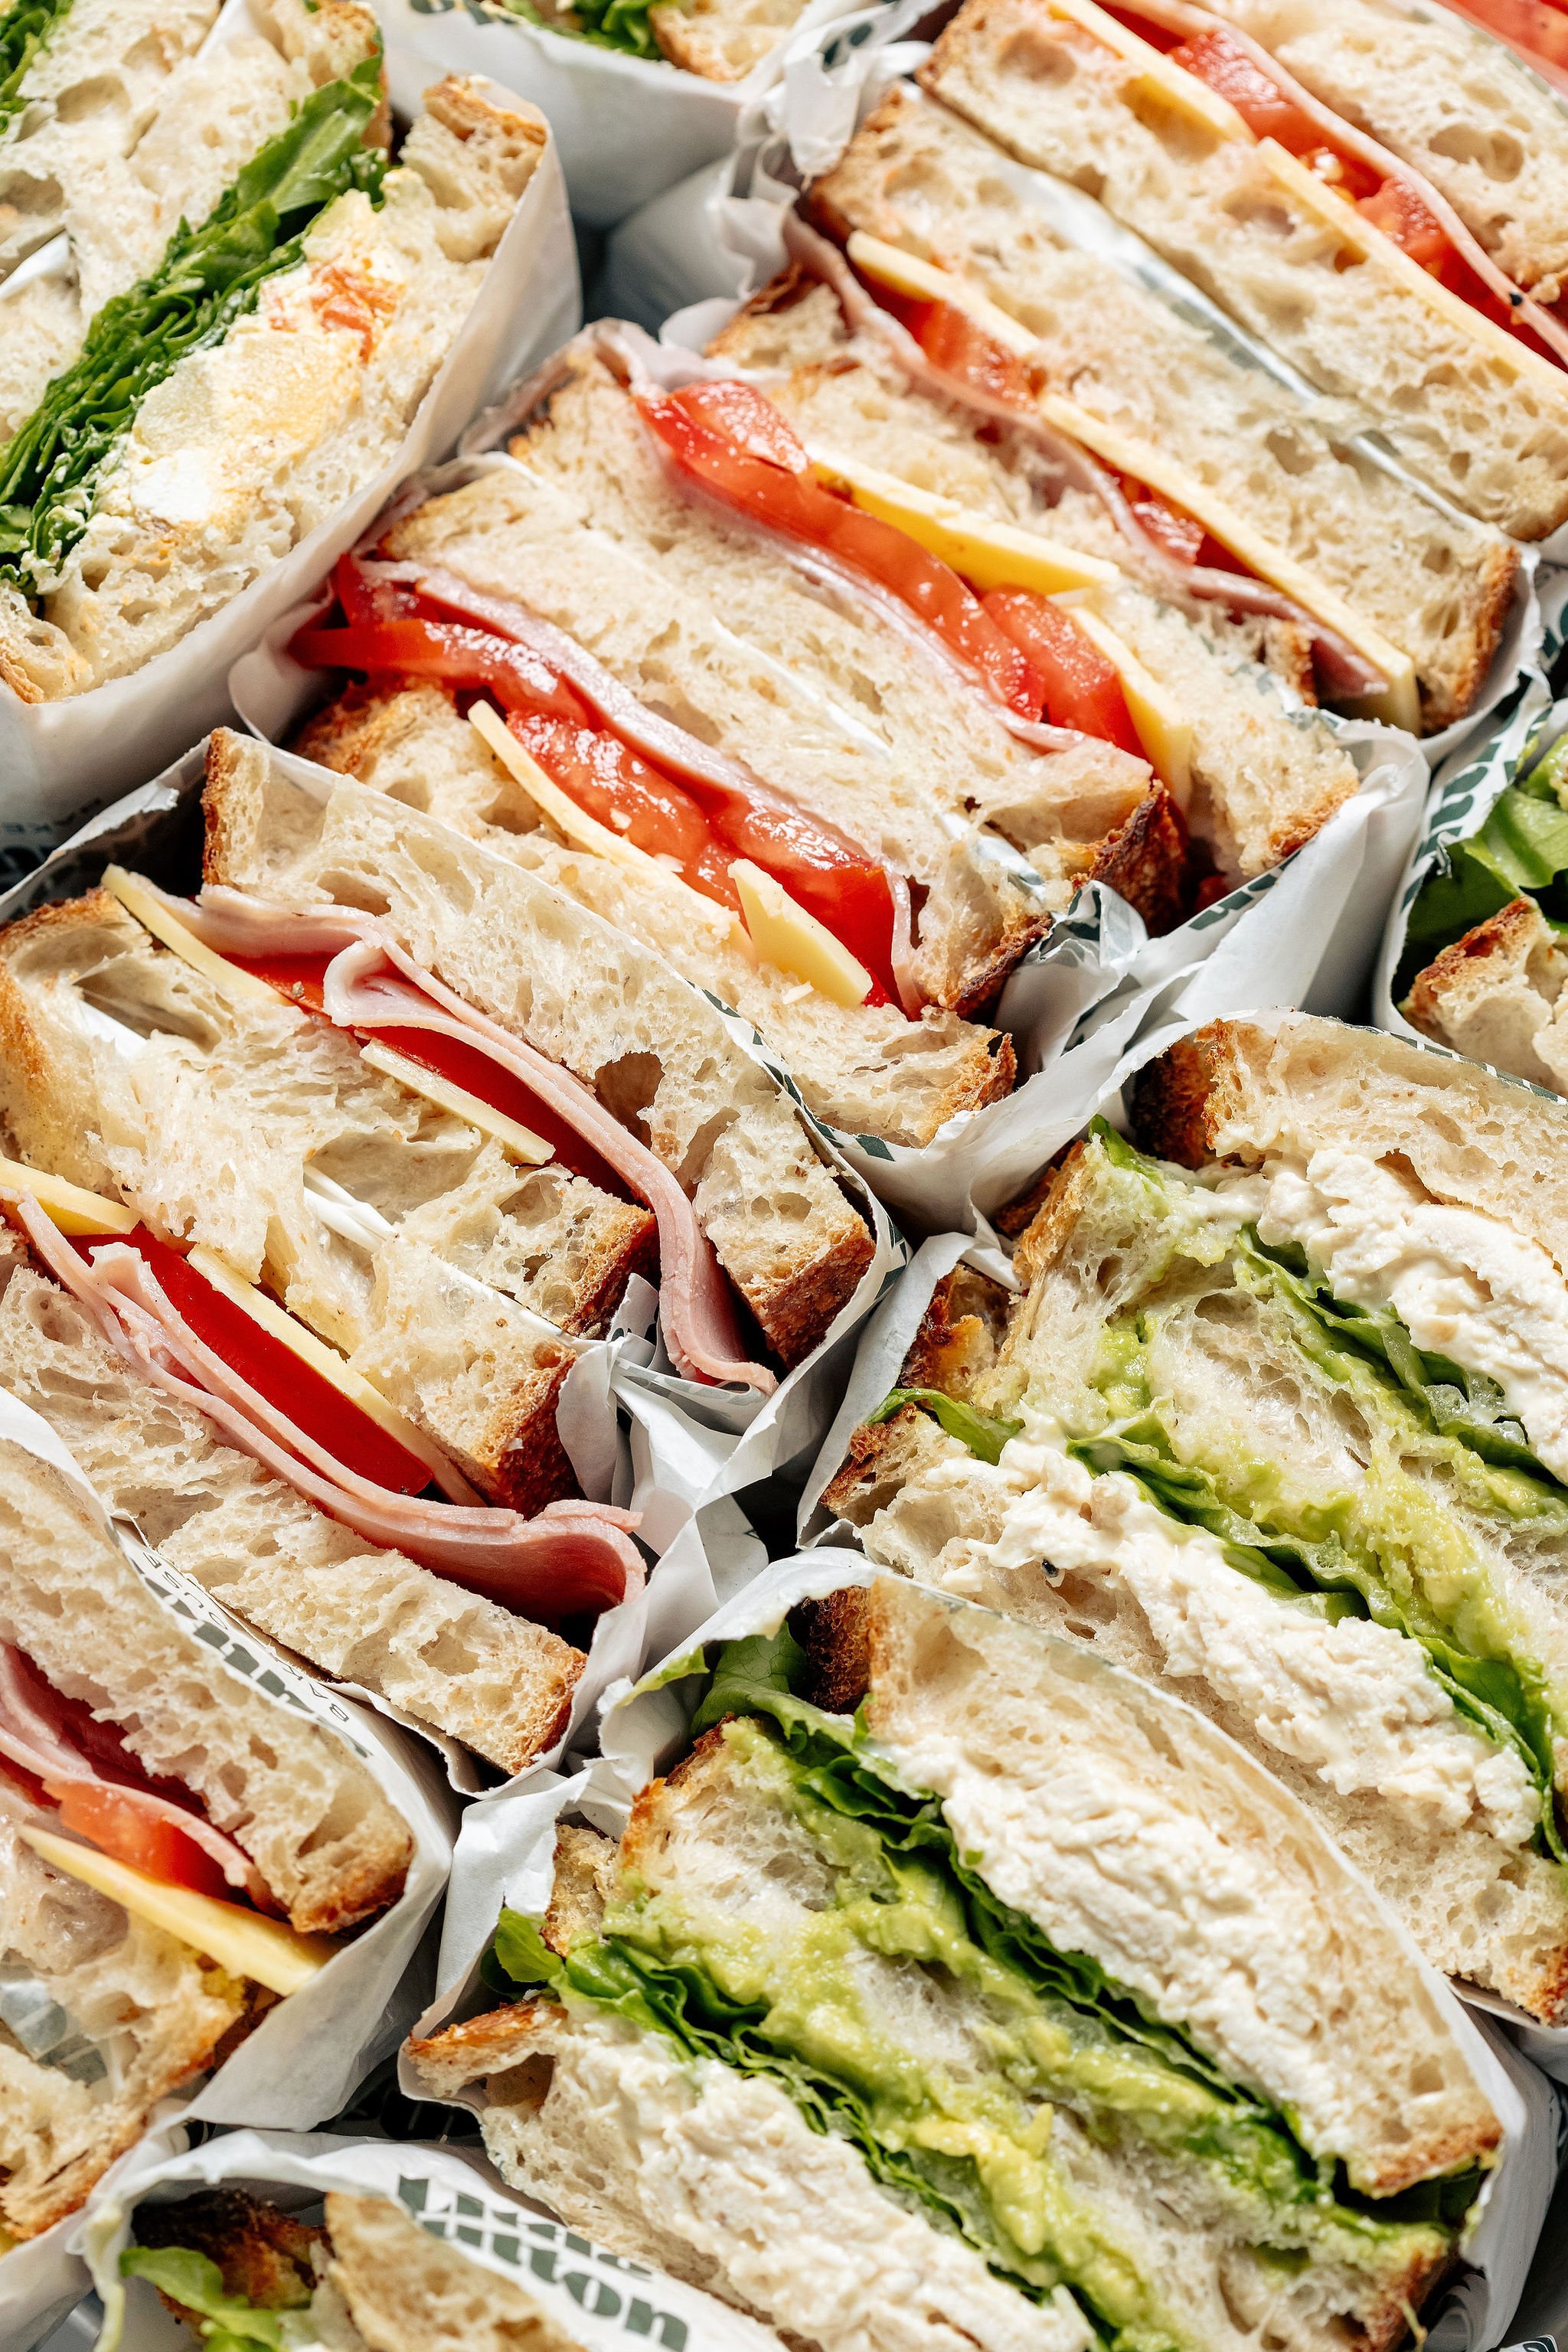 Food photographer - tray of sandwiches